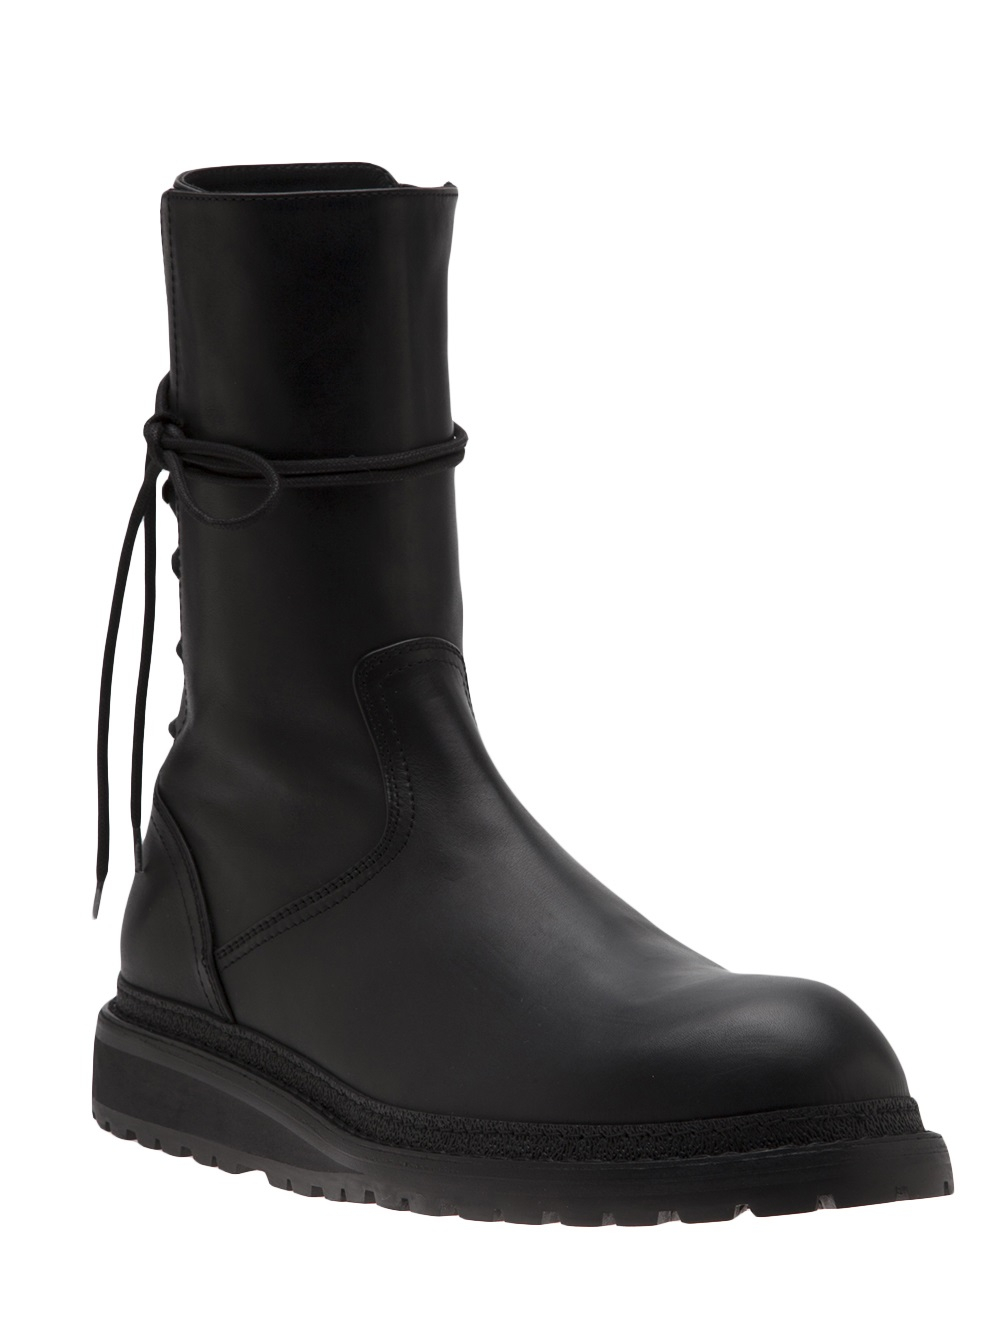 Lyst - Ann demeulemeester Back Lace Up Boot in Black for Men